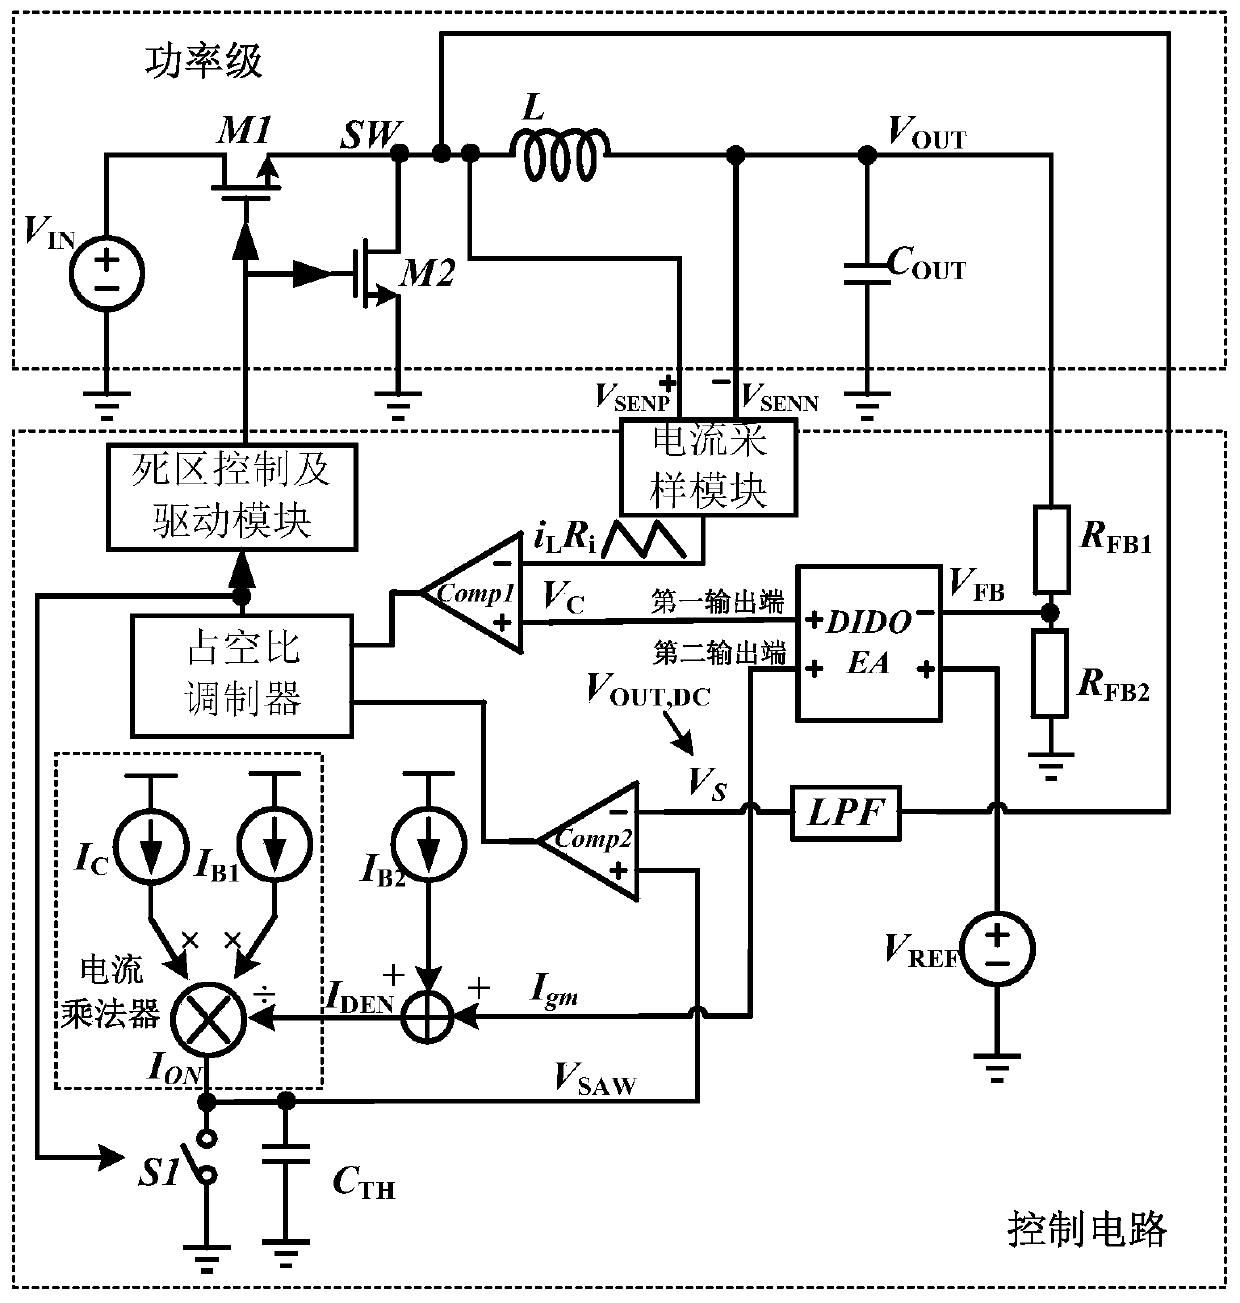 Buck converter based on variable conduction time control